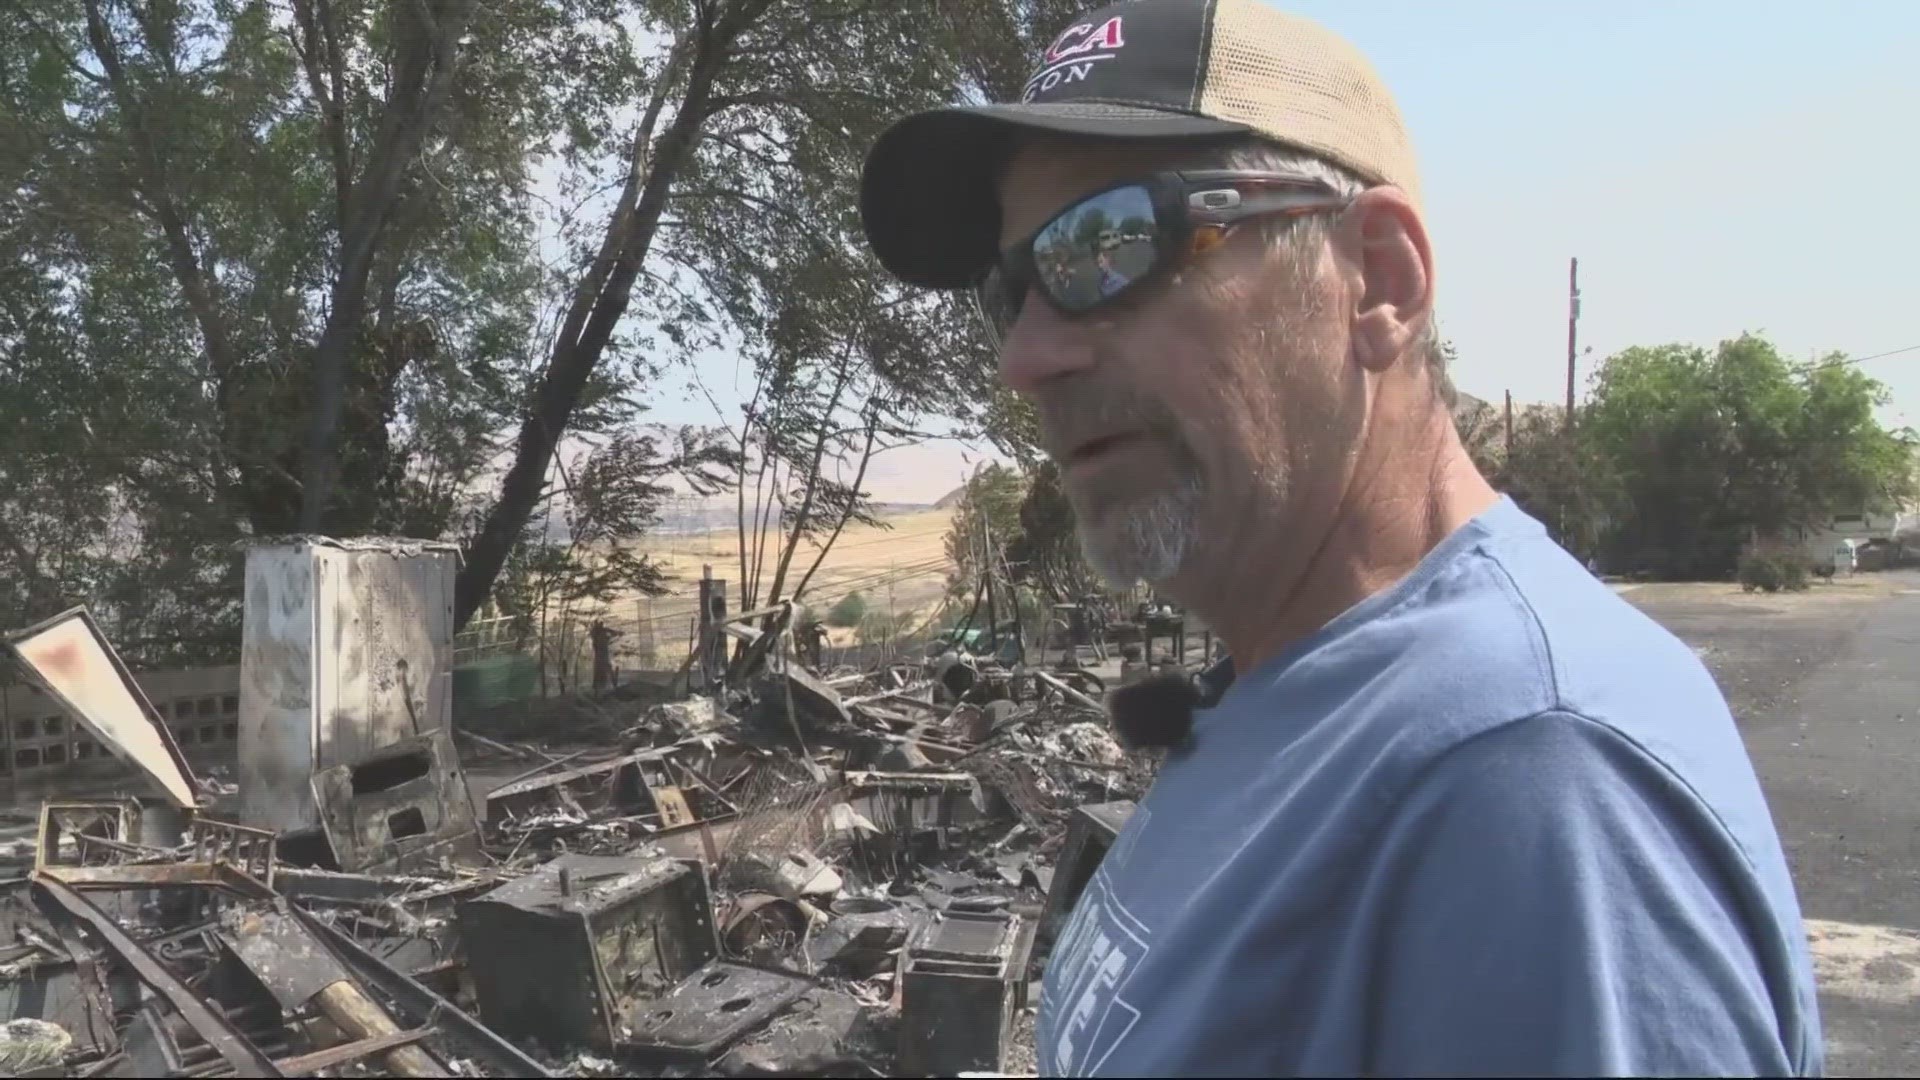 Dave Dixon’s mobile home burned to the ground when flames from the Post 87 fire engulfed the trailer. He had time to save his dog, but lost everything else.